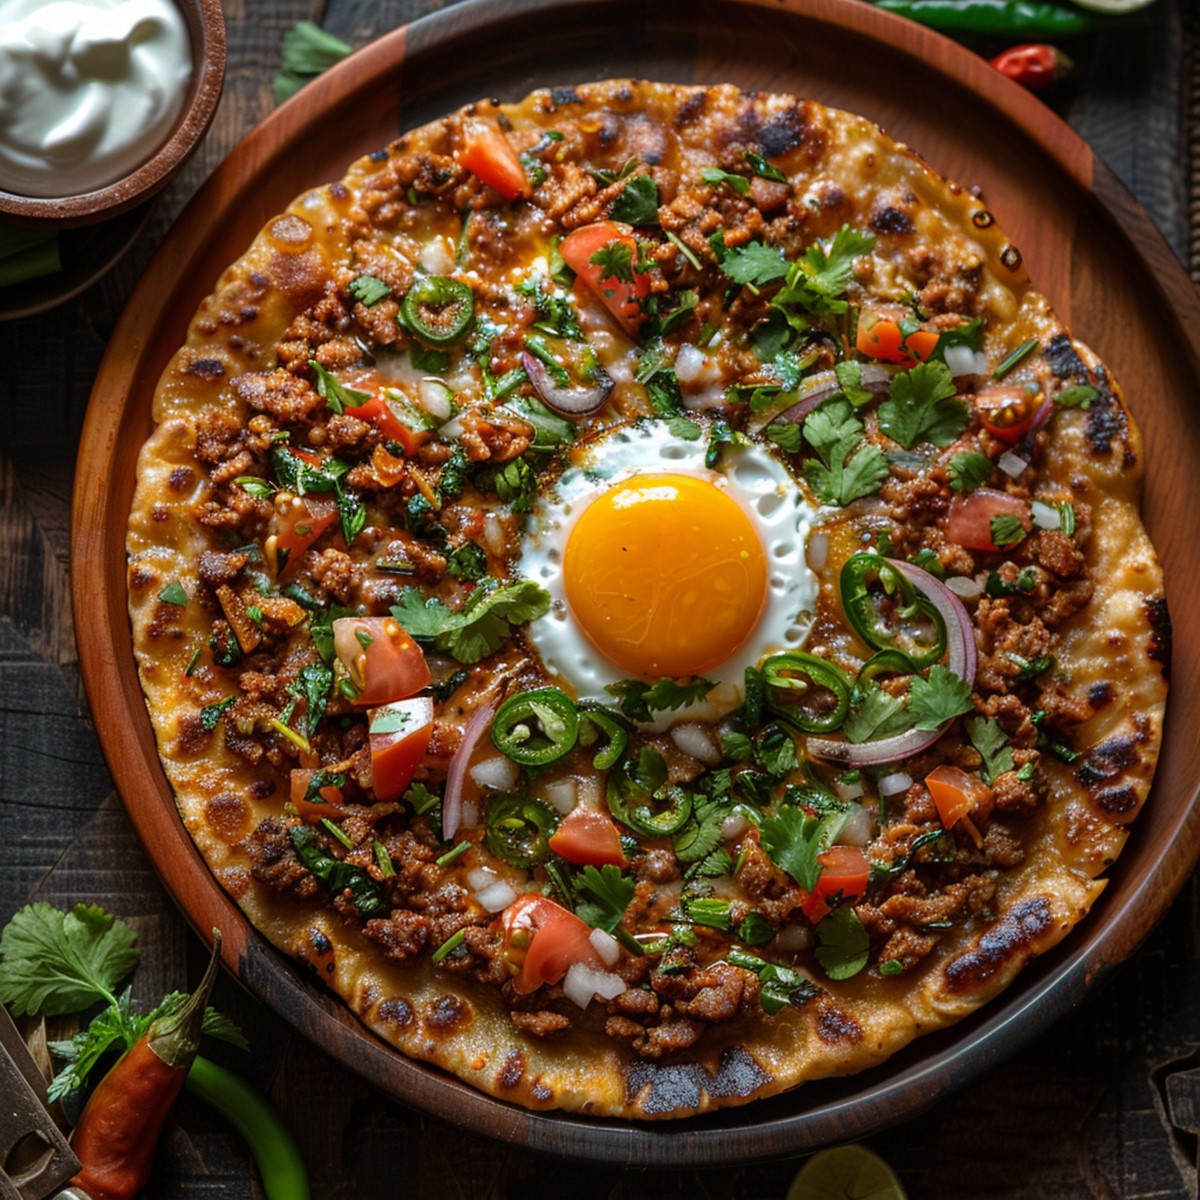 Traditional Newari Chatamari, rice flour crepe topped with minced meat, vegetables, and egg, garnished with coriander leaves, served with yogurt on a rustic wooden table.